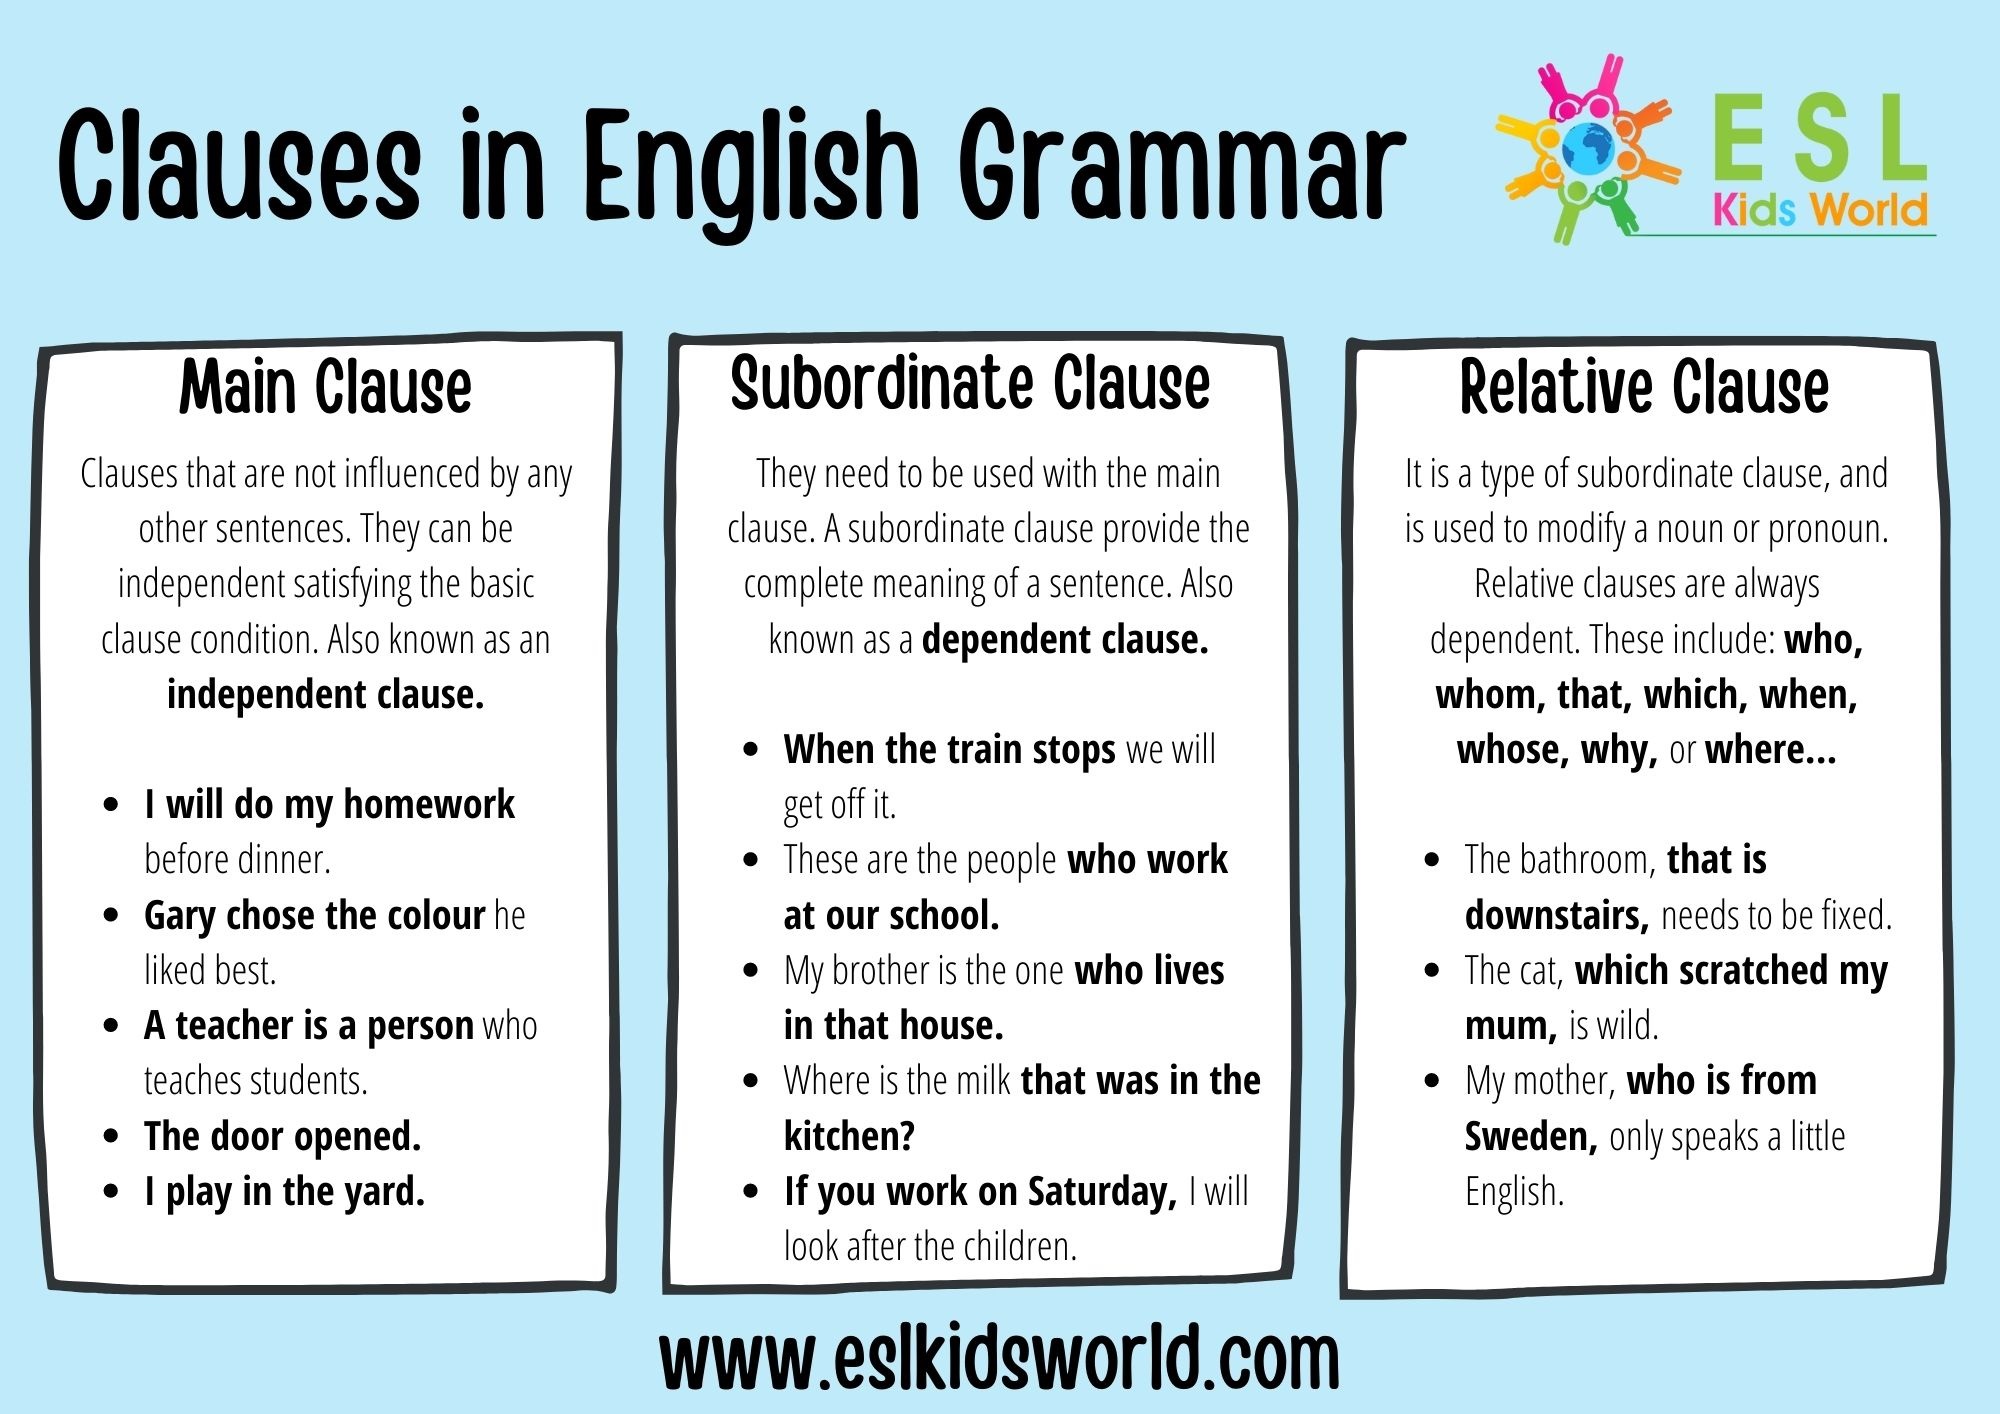 clauses-in-english-grammar-what-is-a-clause-esl-kids-world